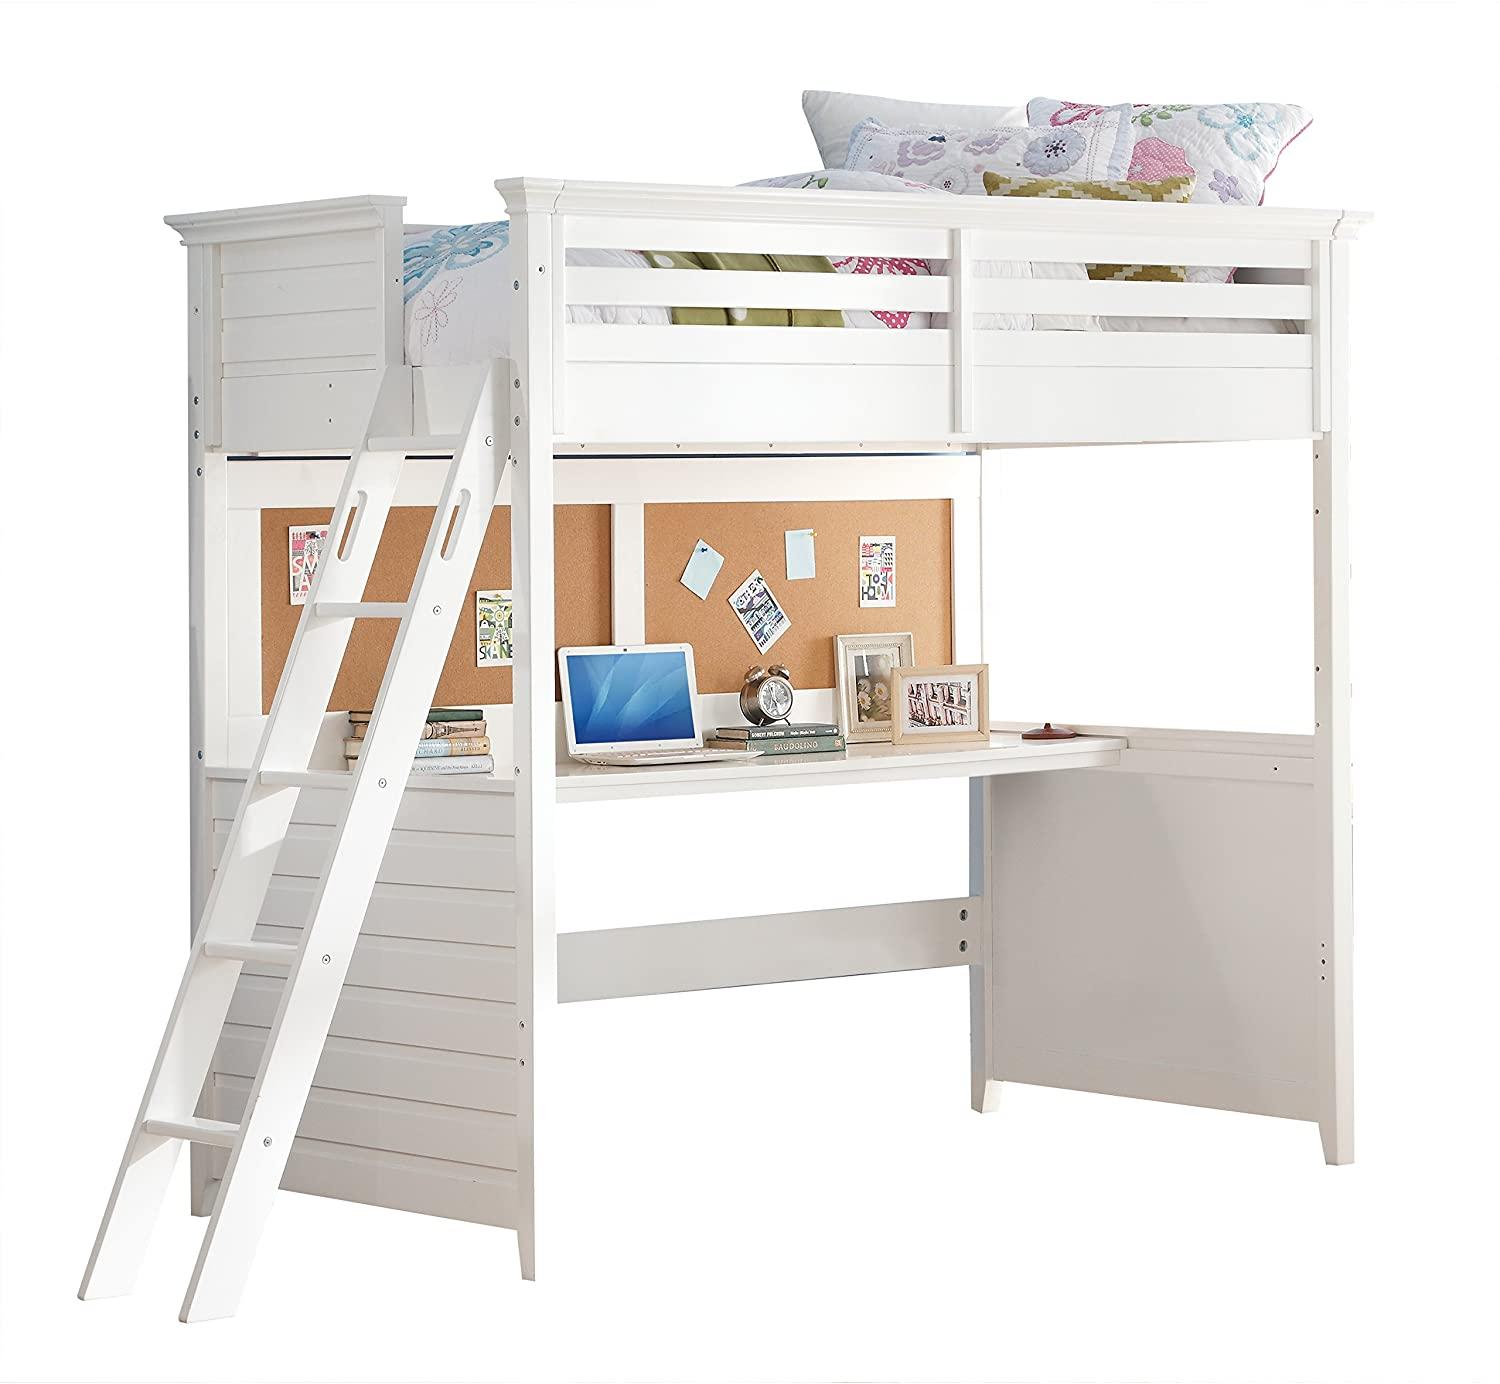 

    
Transitional White Twin Loft Bed w/ Desk & Cork-Board Panel by Acme Lacey 37670
